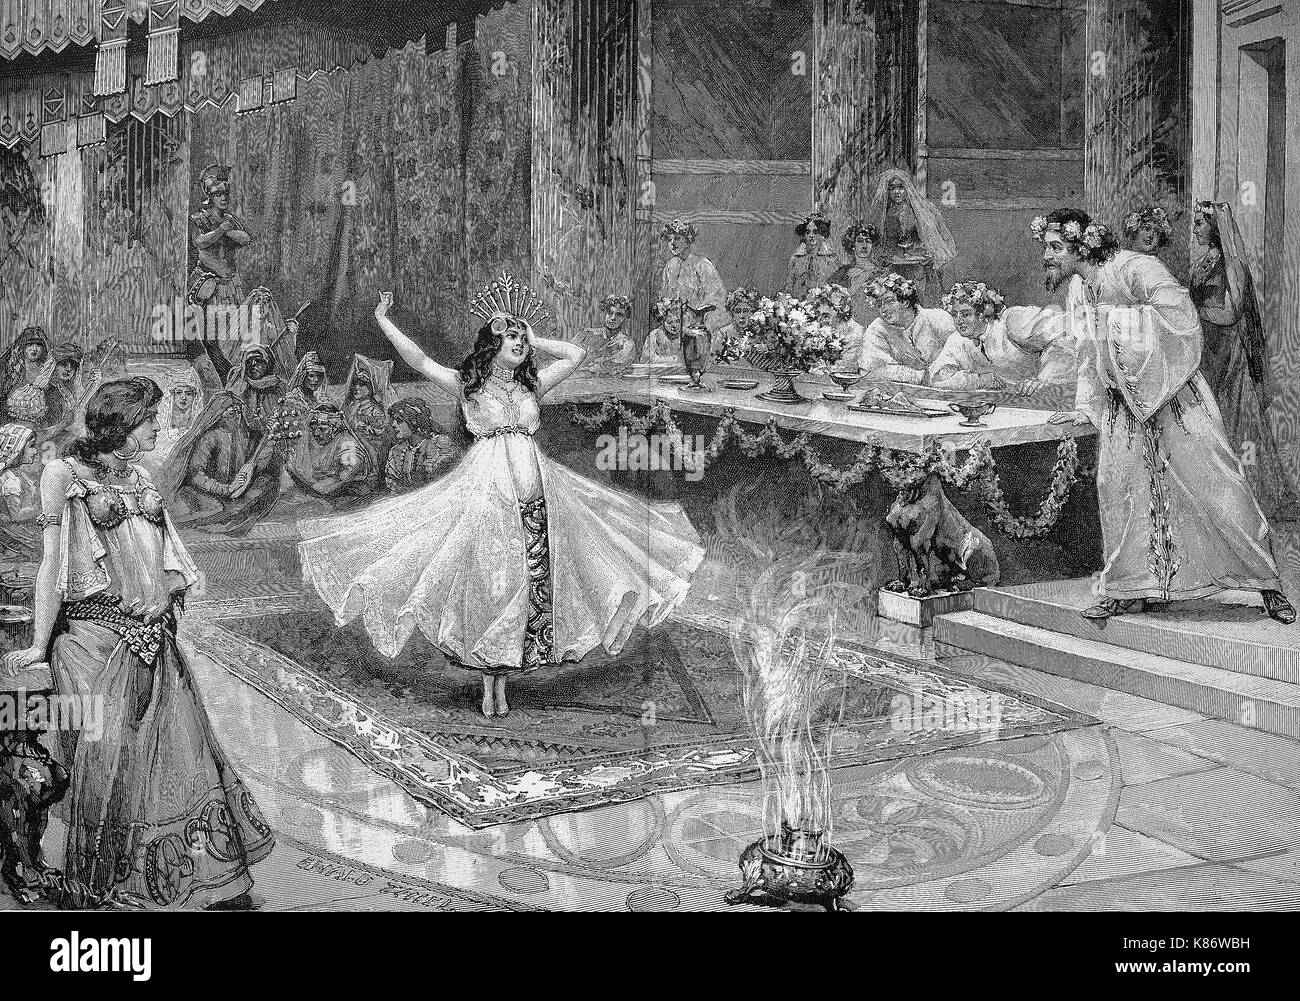 Salome dances infront of Herodes, Salome I, ca 65 BCE - ca. 10 CE, was the sister of Herod the Great, scene from the tragedy Johannes by Hermann Sudermann, Digital improved reproduction of an original woodprint from the 19th century Stock Photo